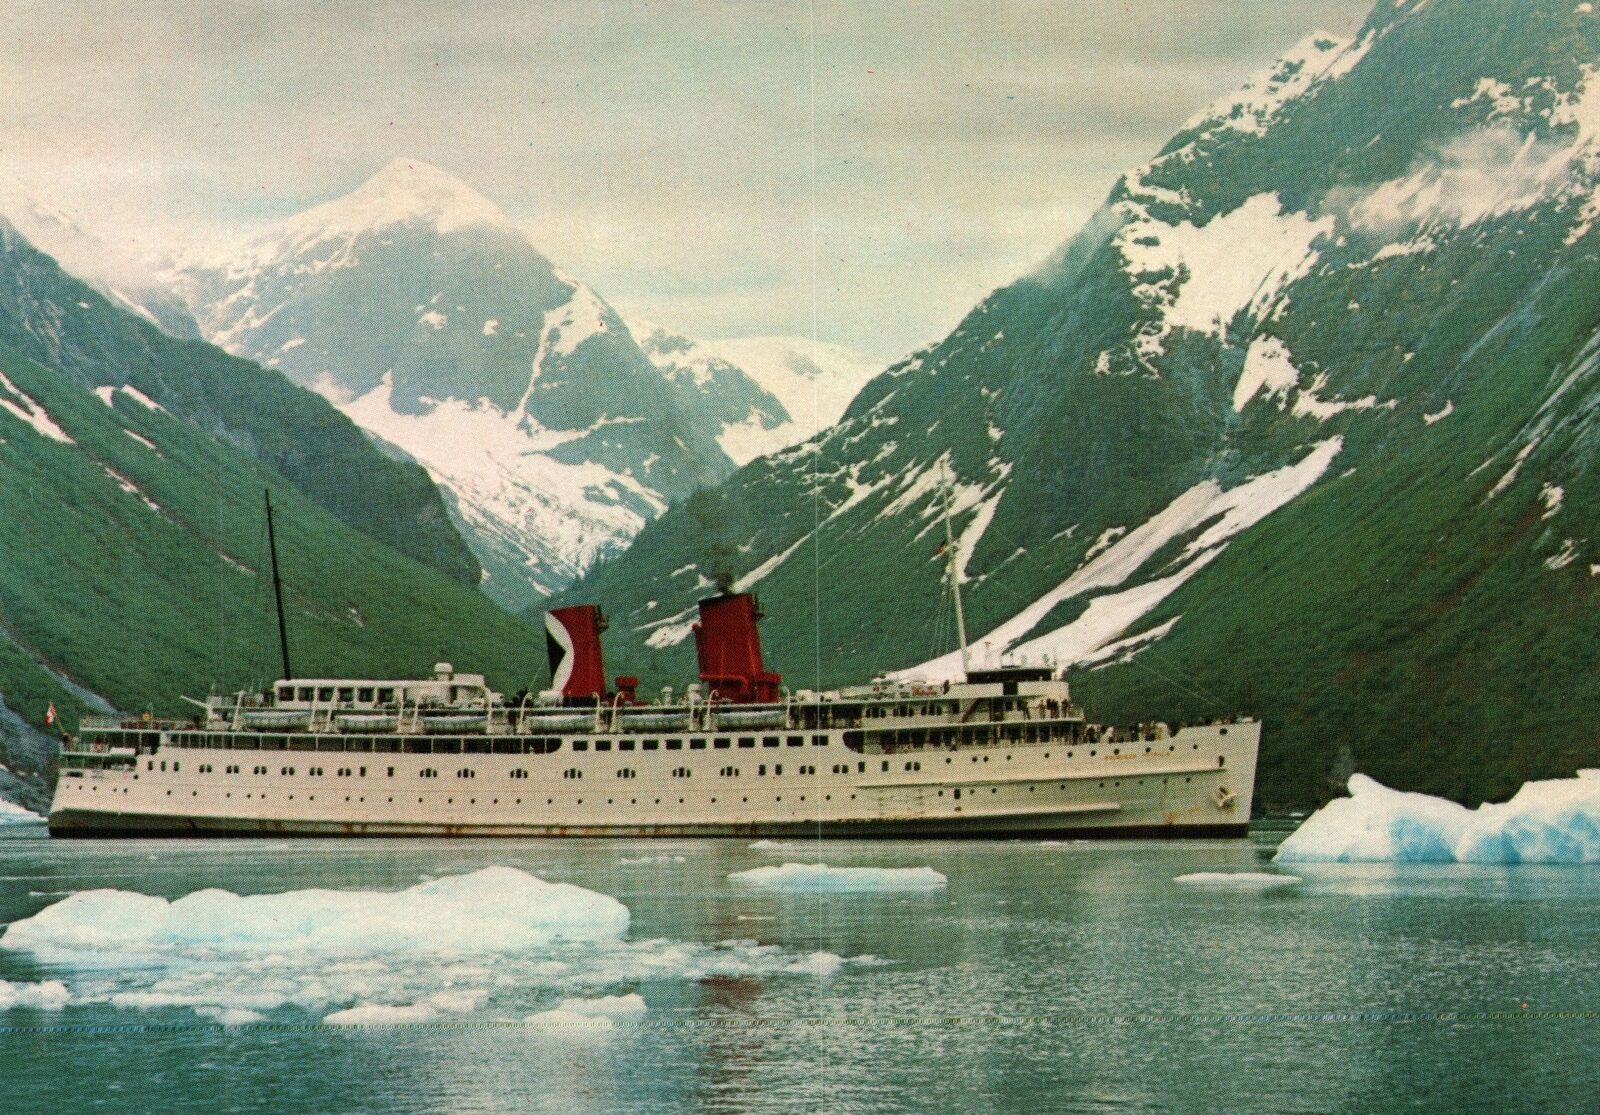 CONTINENTAL SIZE POSTCARD THE PRINCESS PATRICIA OF THE C.P. RAIL INSIDE PASSAGE